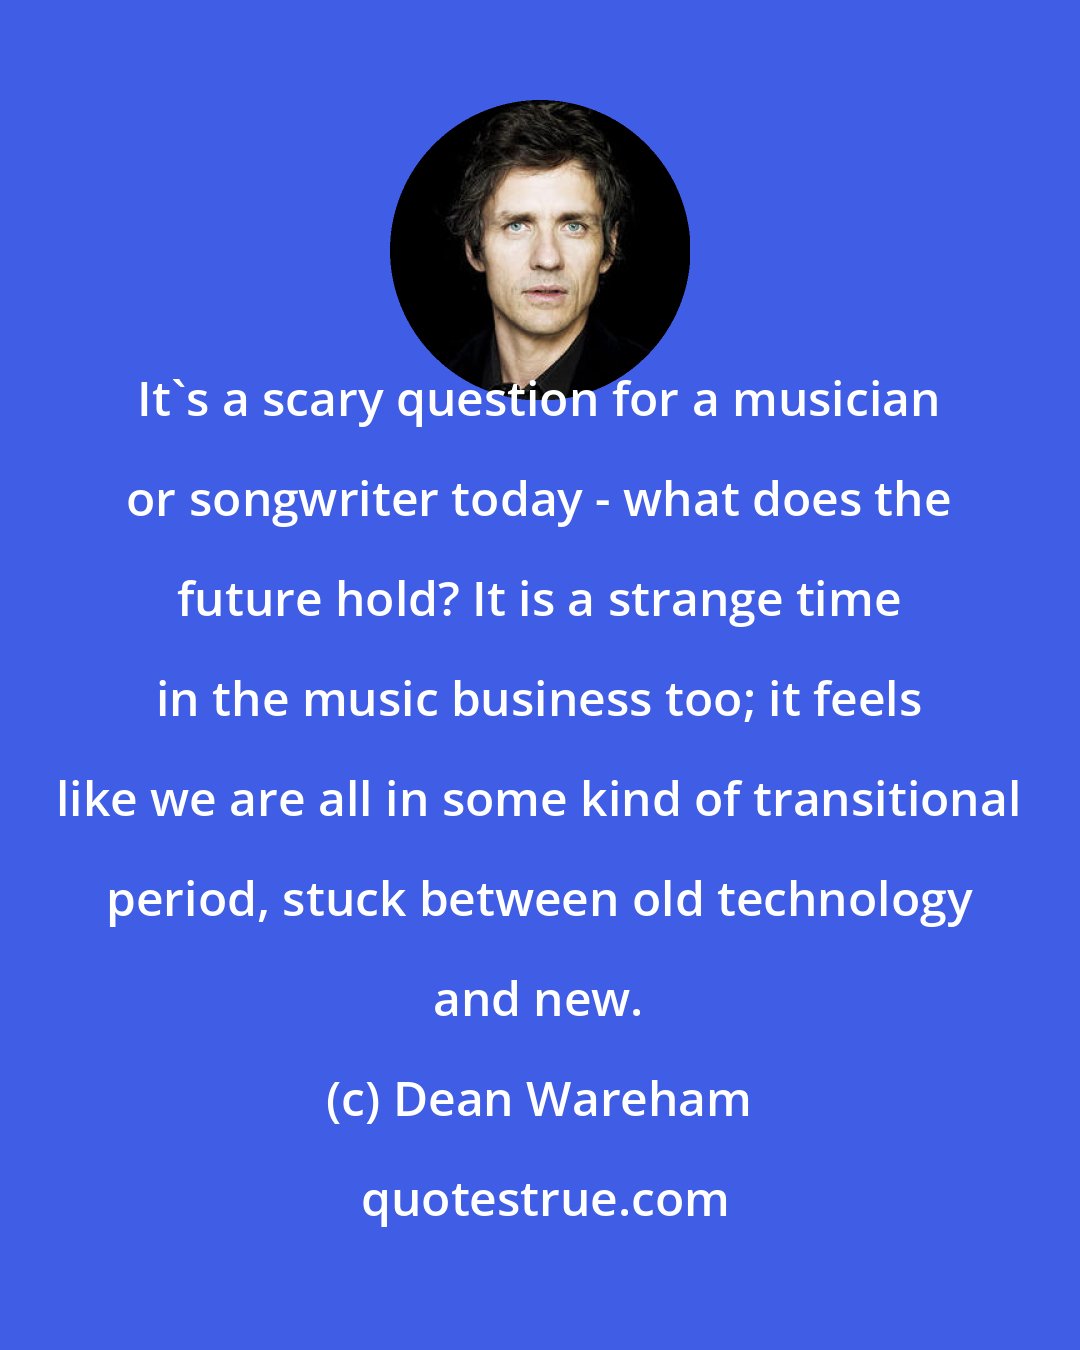 Dean Wareham: It's a scary question for a musician or songwriter today - what does the future hold? It is a strange time in the music business too; it feels like we are all in some kind of transitional period, stuck between old technology and new.